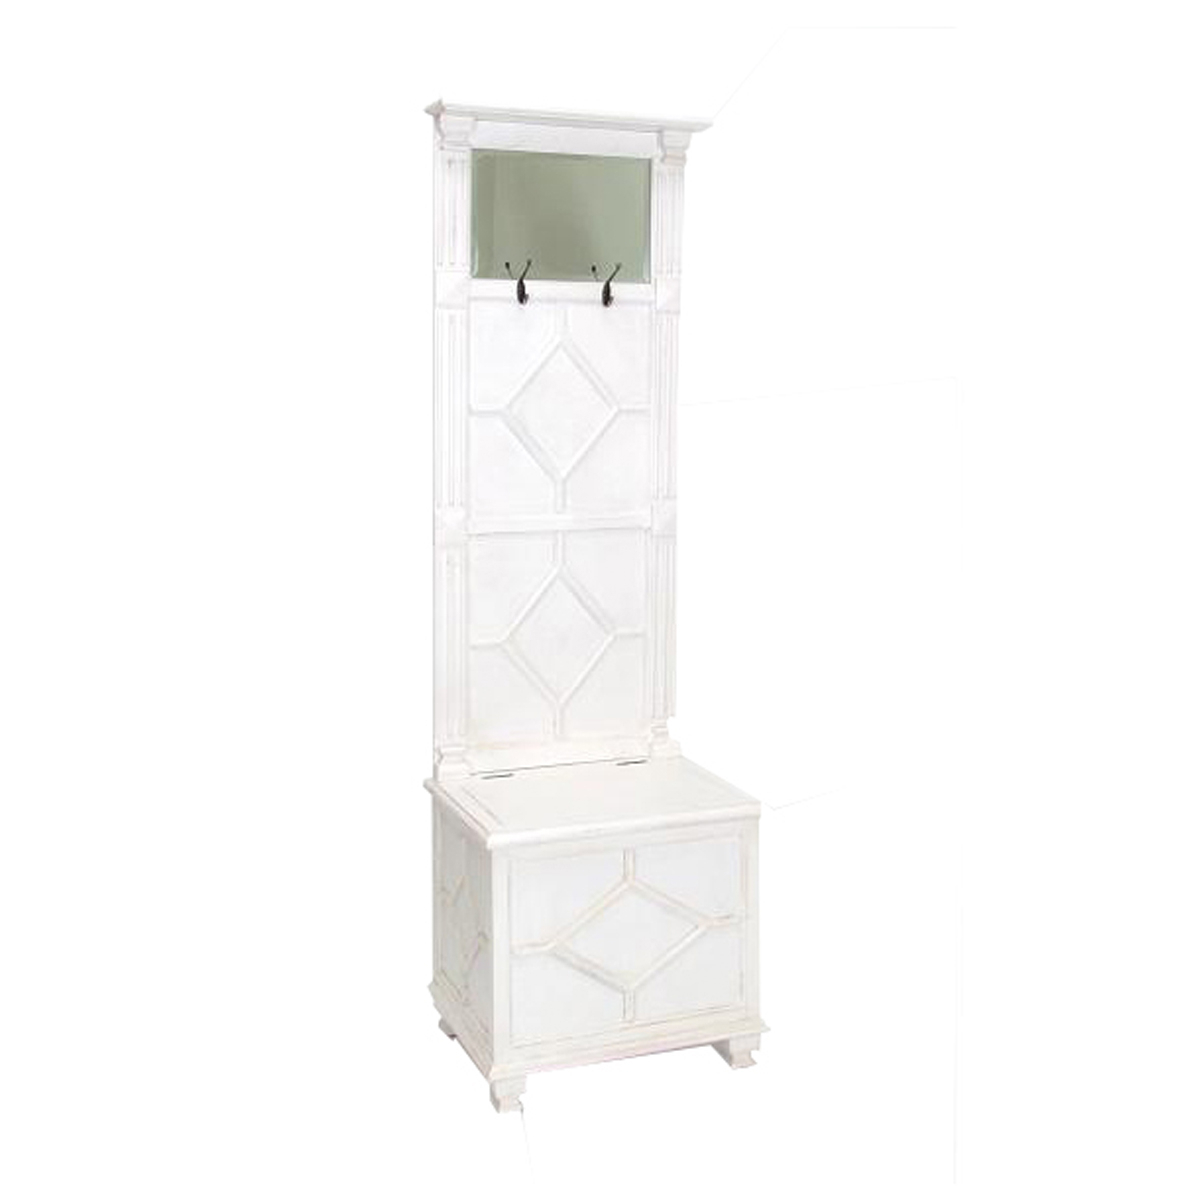 Molded Wooden Frame Hall Tree With Lift Top Box And Mirror Insert, White- Saltoro Sherpi